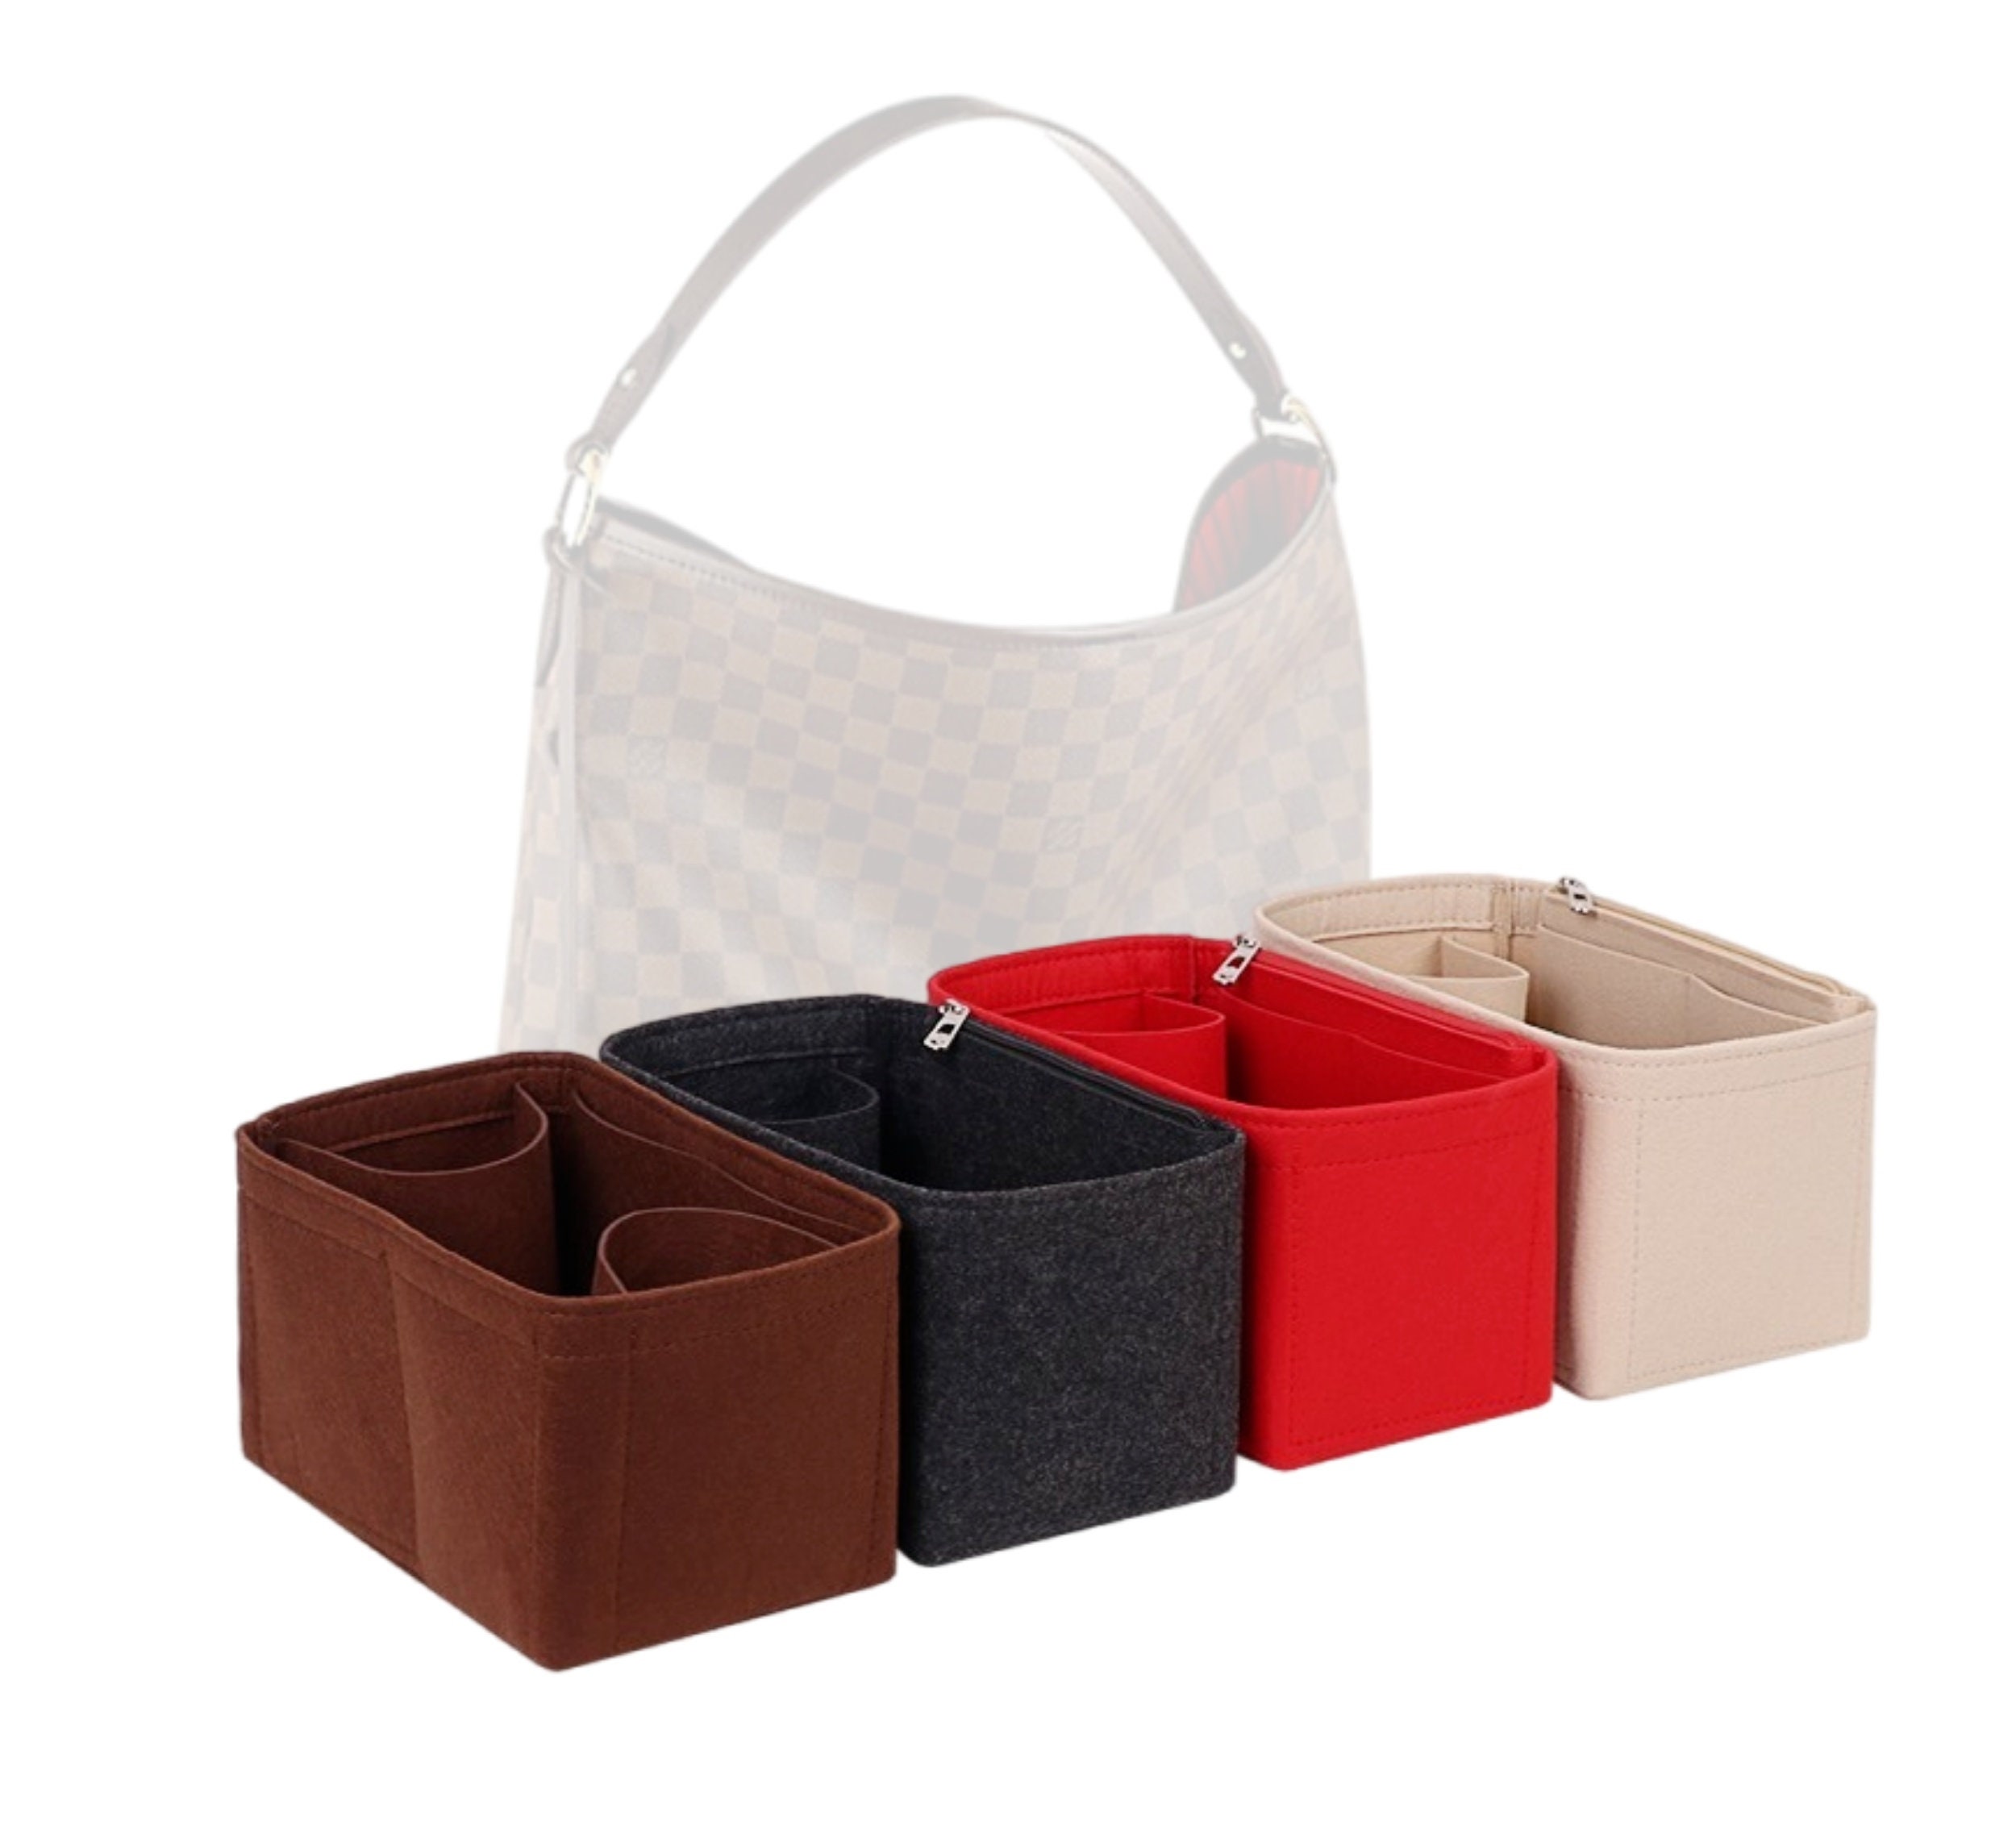 Tote Bag Organizer For Louis Vuitton Delightful GM Bag with Single Bot